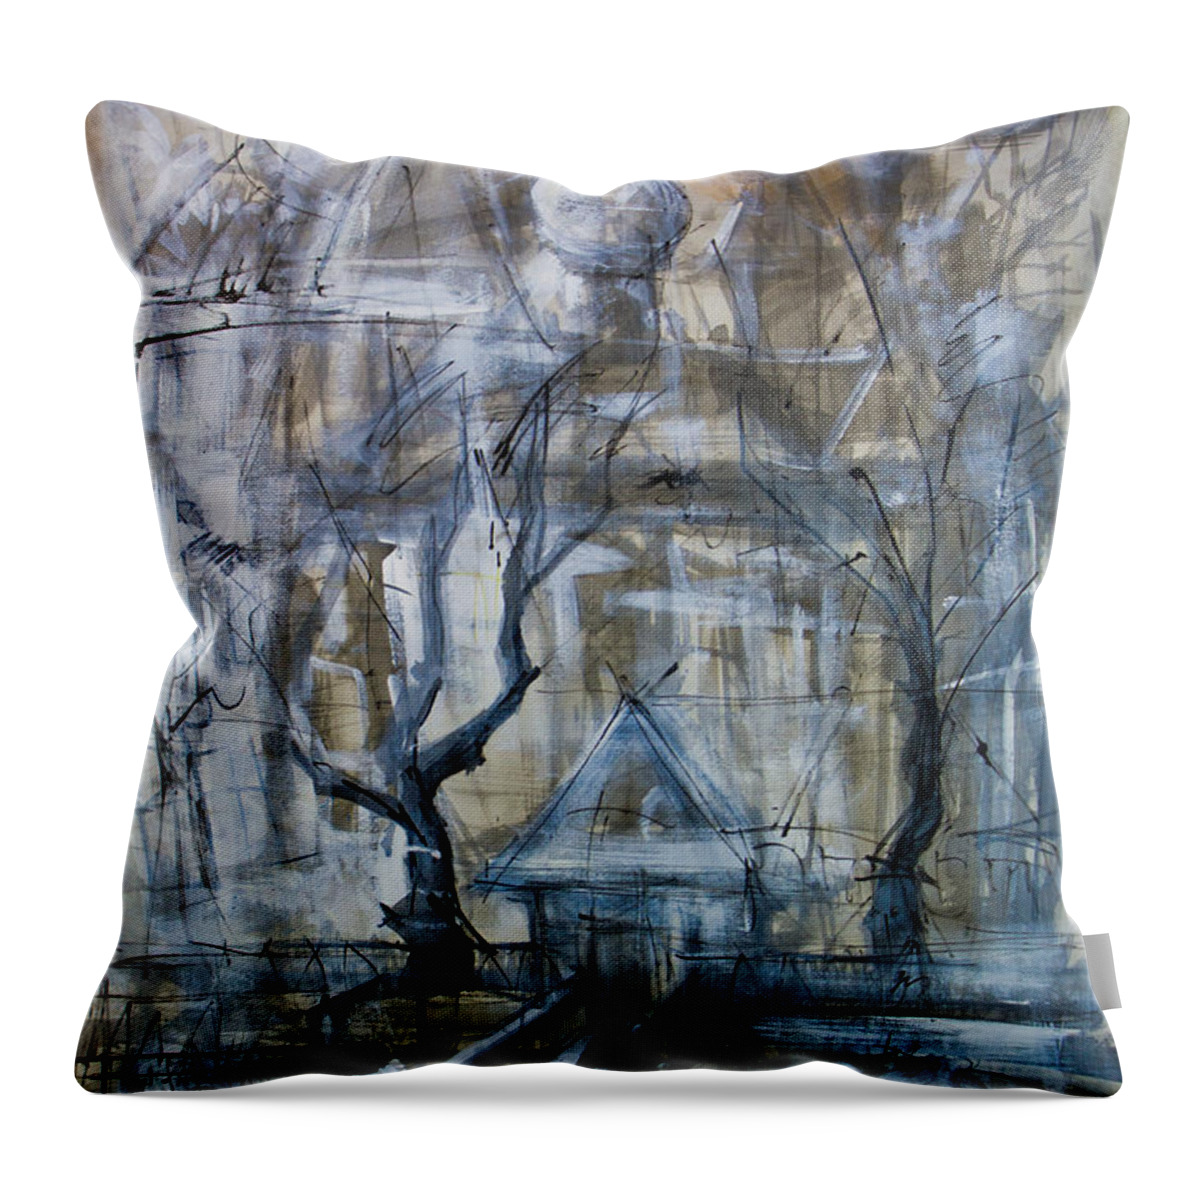 Cityscape Throw Pillow featuring the painting Winter City by Maxim Komissarchik